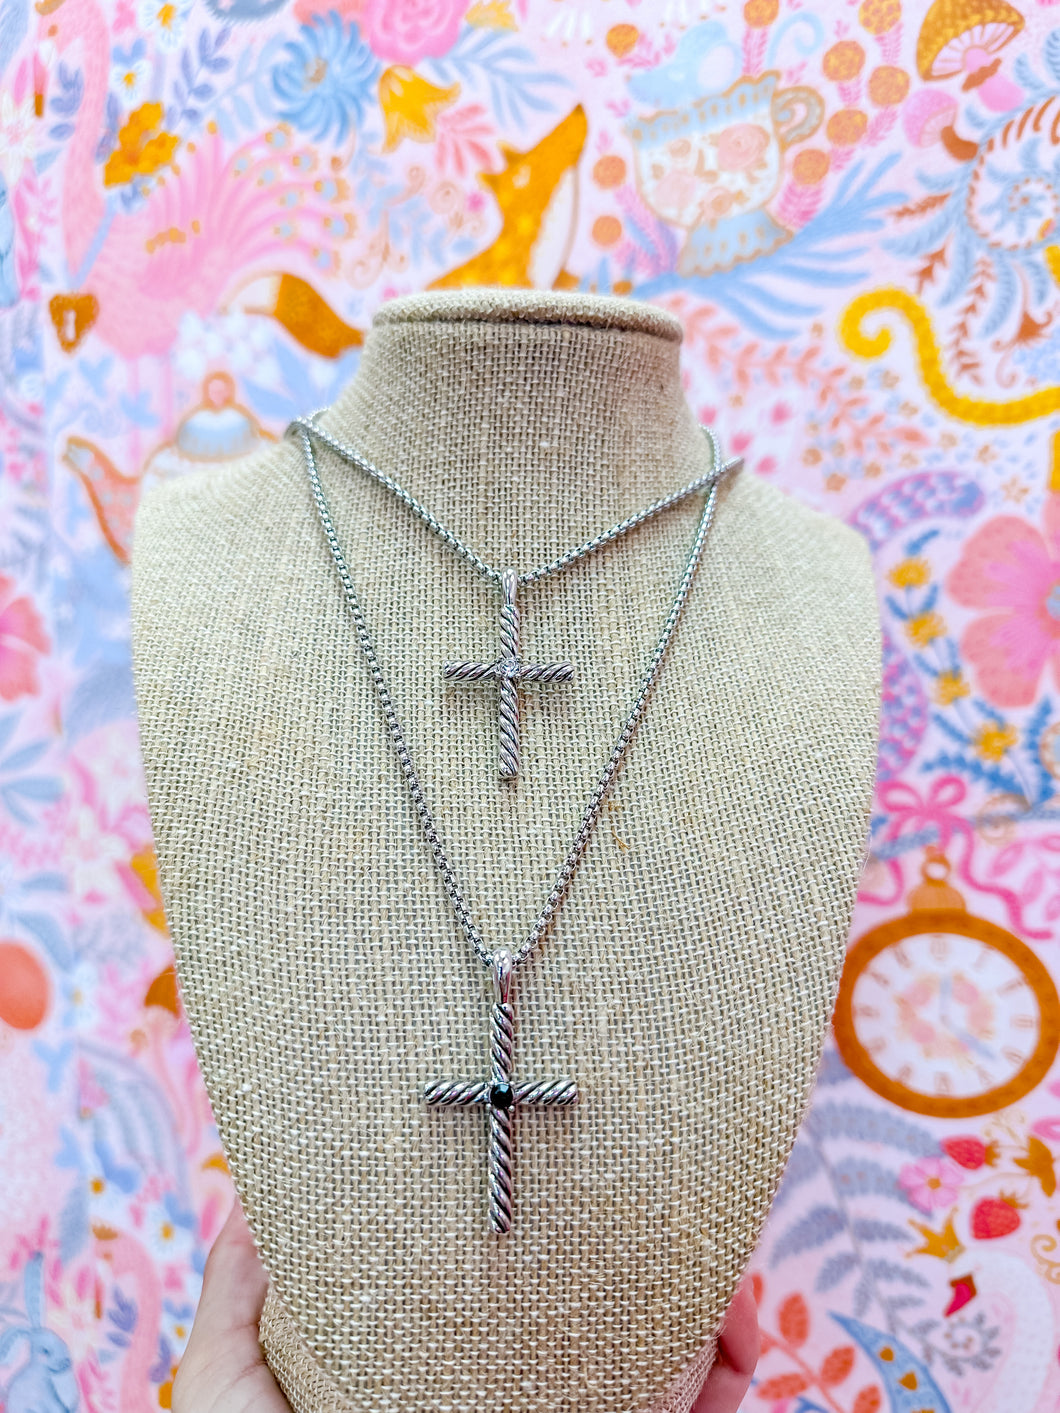 Cable Cross Necklace